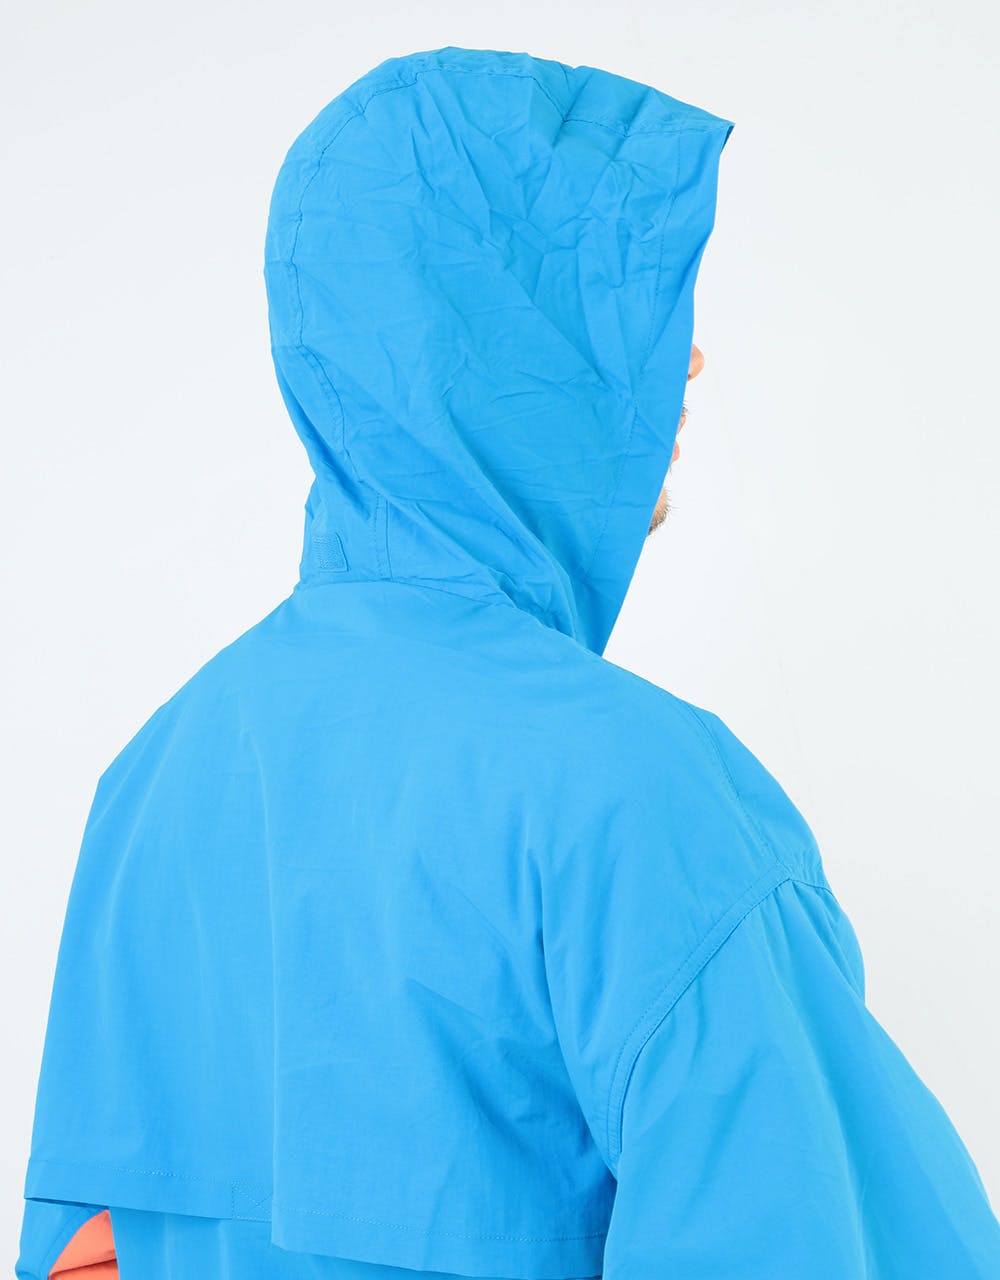 Obey Title Anorak - Sky Blue